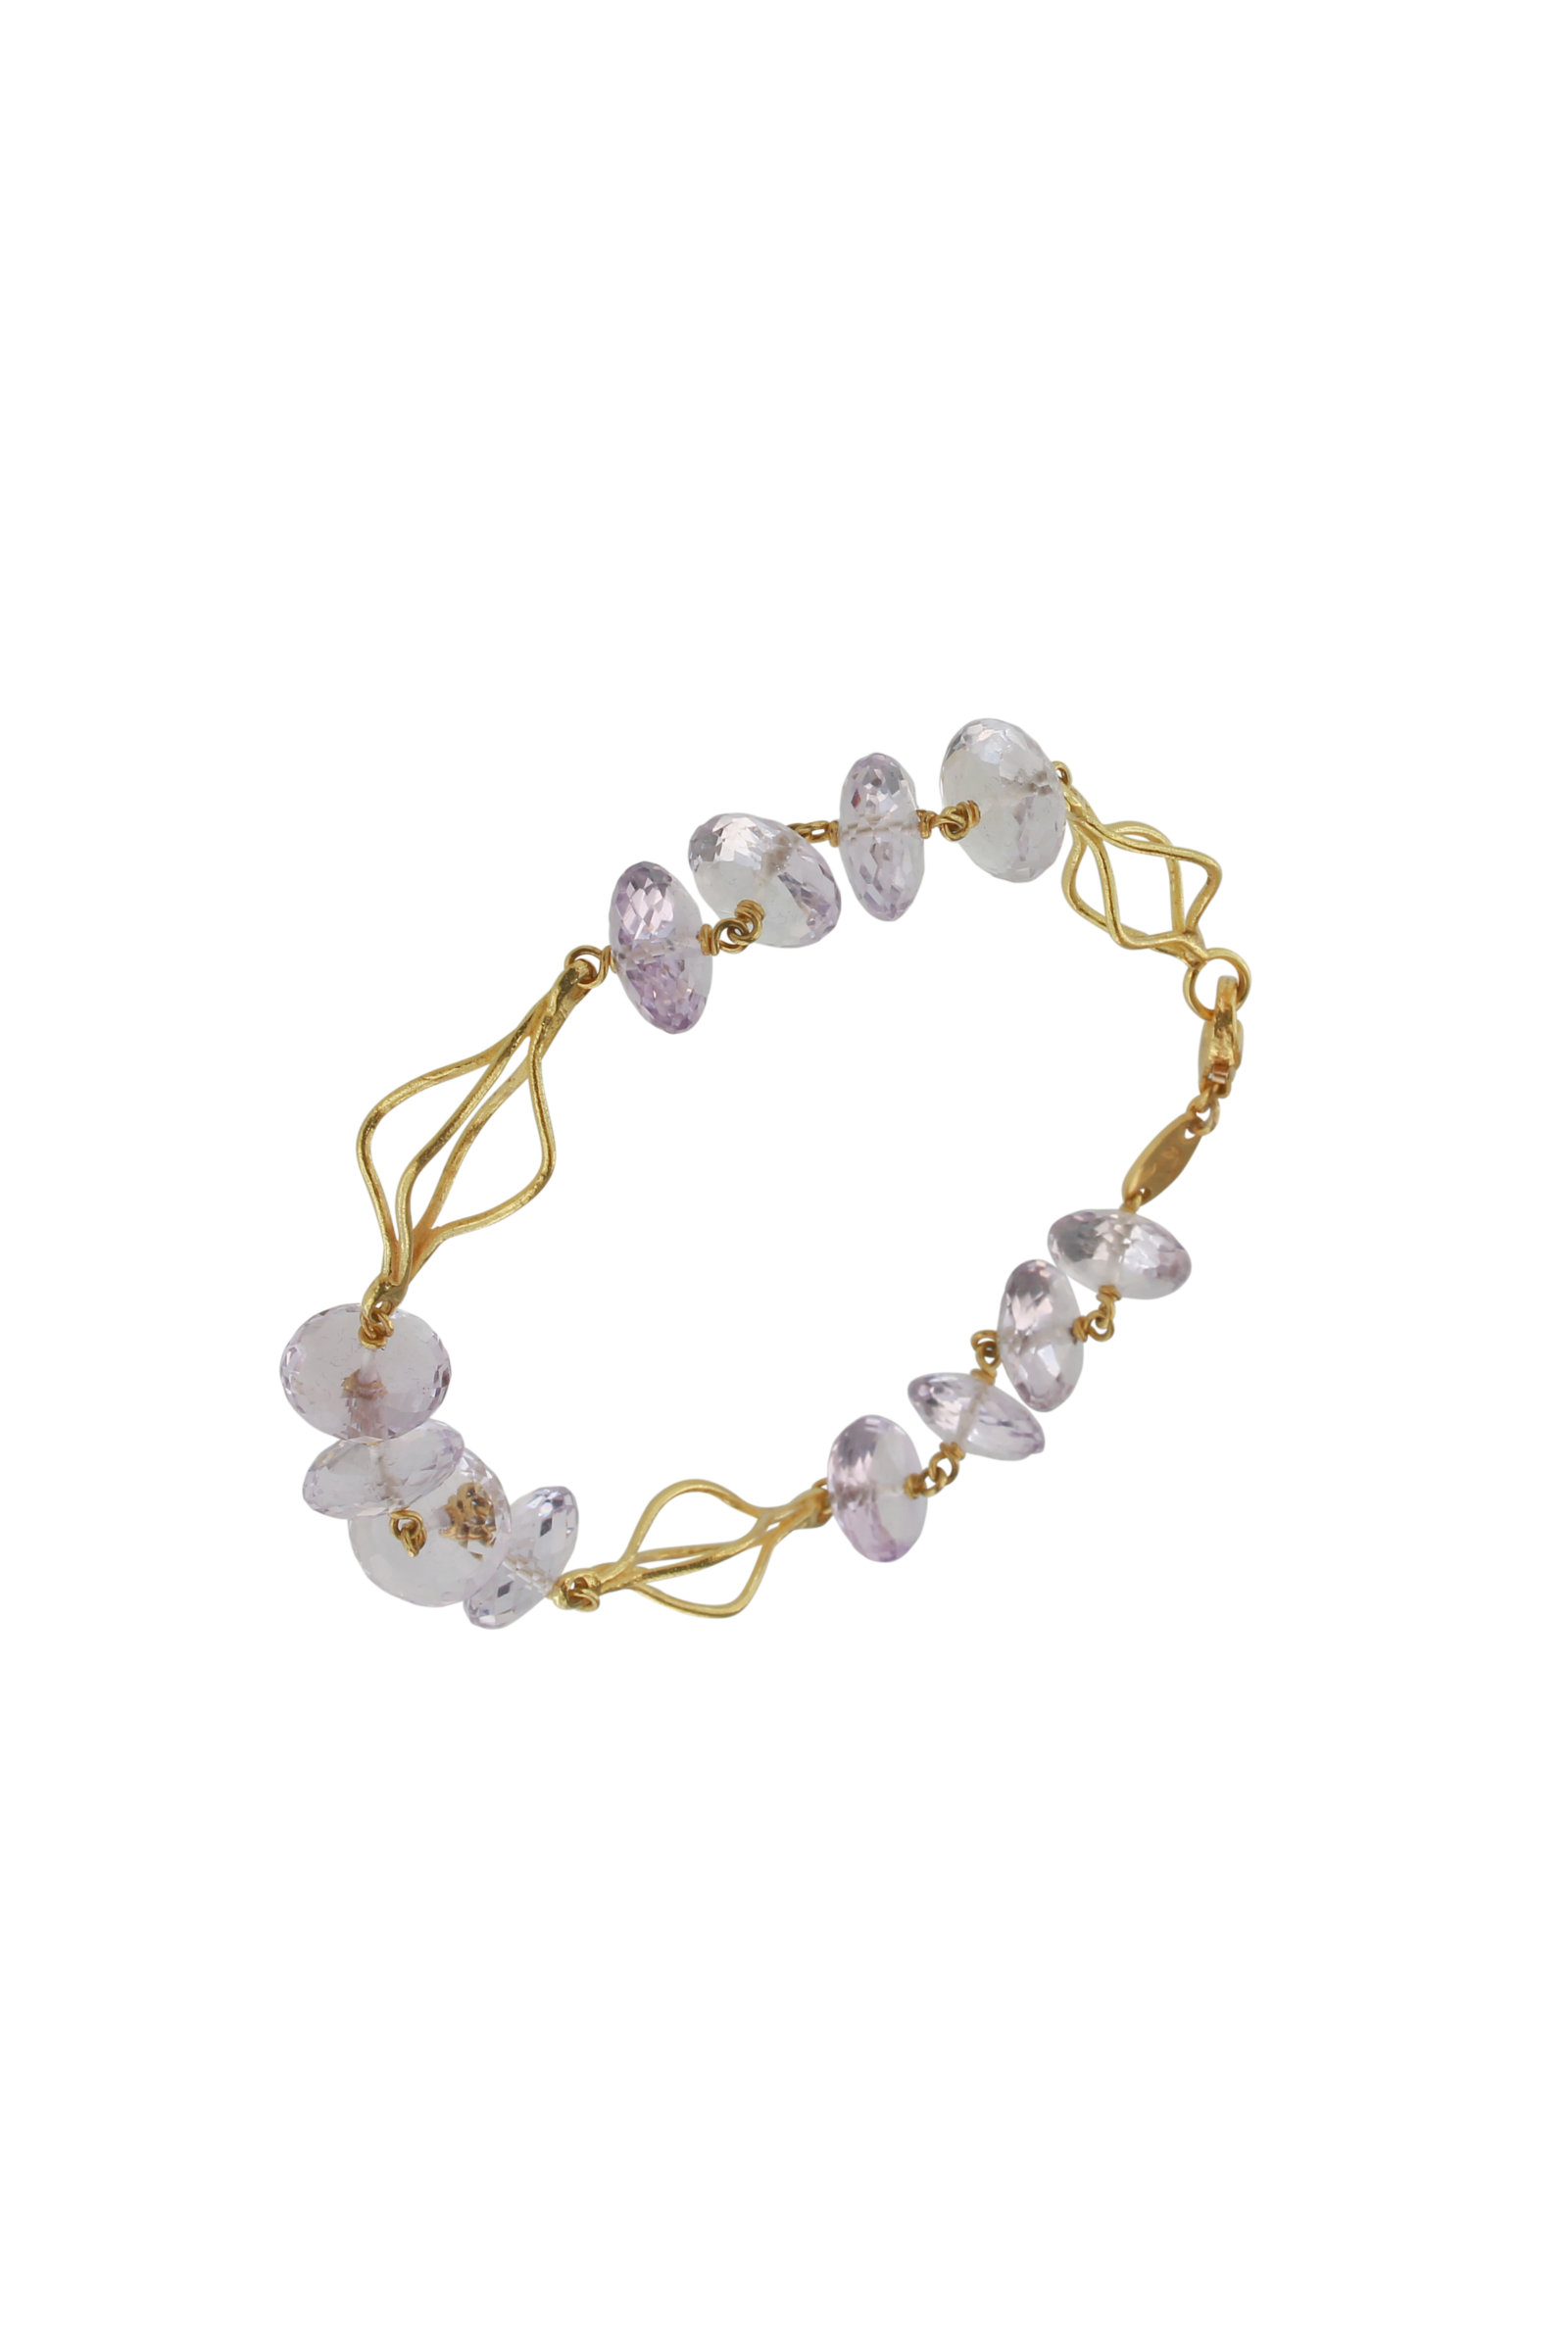 SB221C-18-Kt-Yellow-Gold-Bracelet-with-Lilac-Amethyst-1